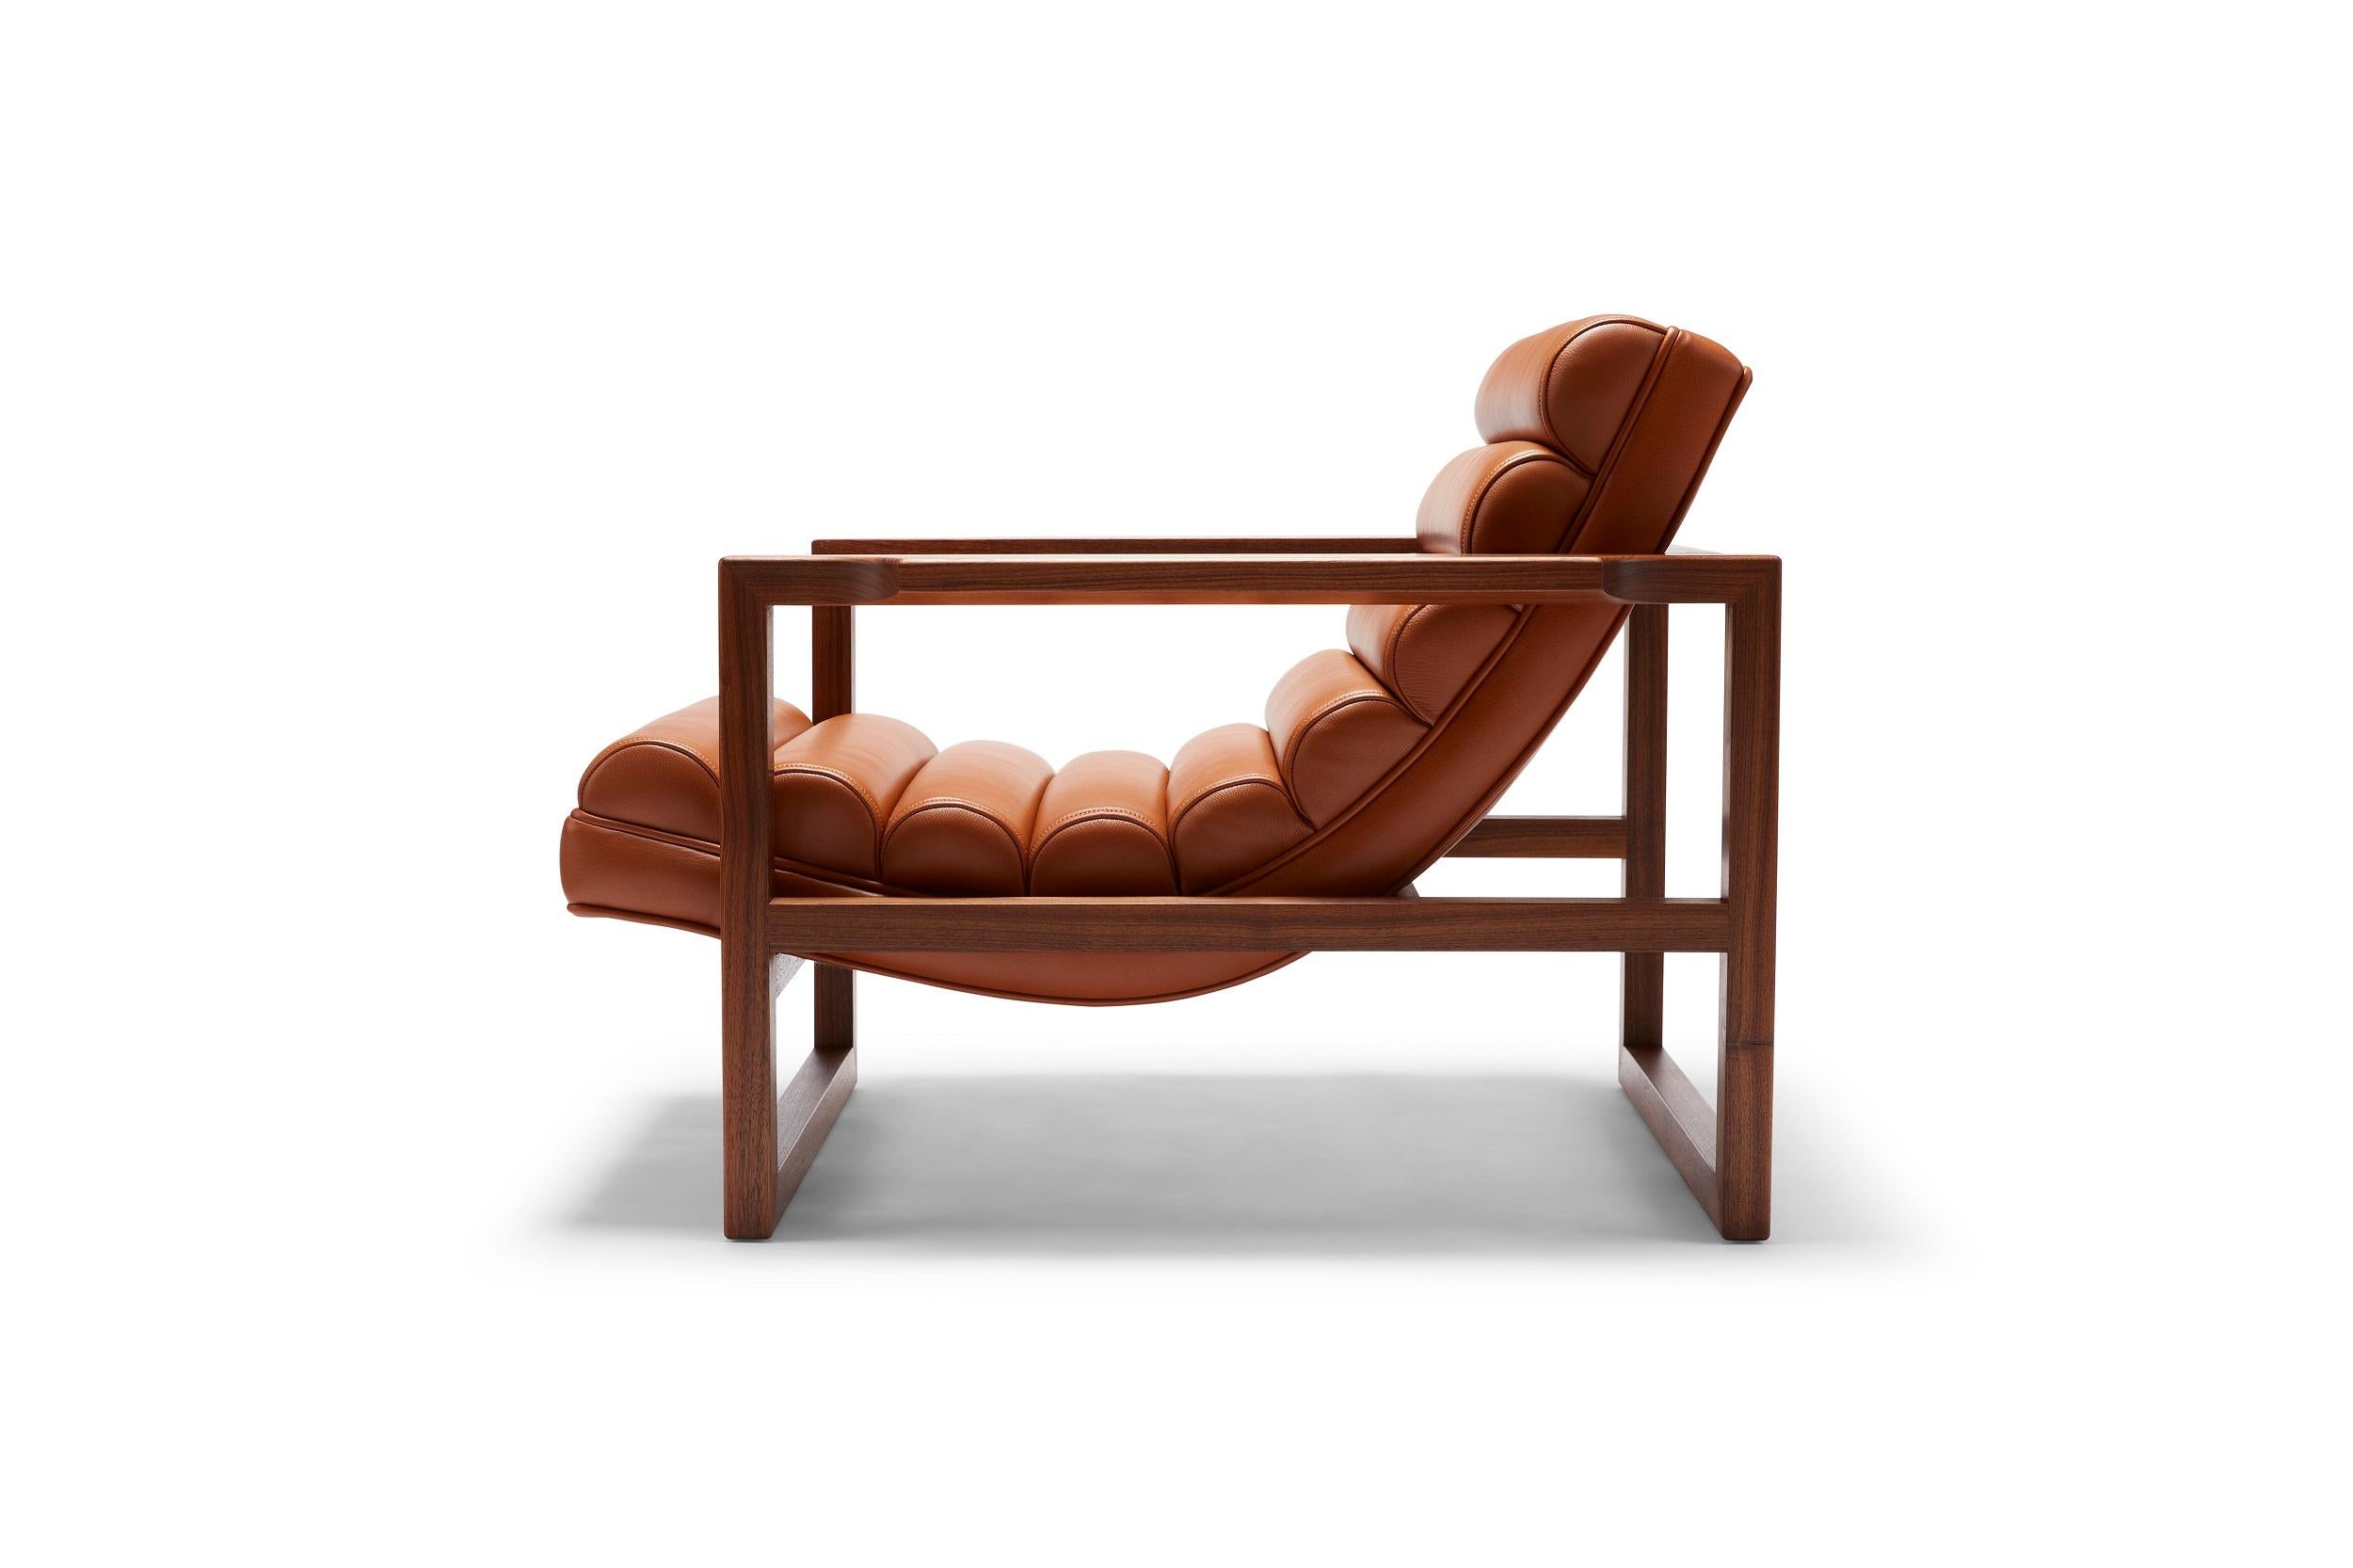 Created with the ultimate lounging comfort in mind and featuring a subtly detailed oiled walnut frame, the Florence is pure statement. It works well upholstered in fabric but our recommendation is lustrous leather in a bold color. Shown here in